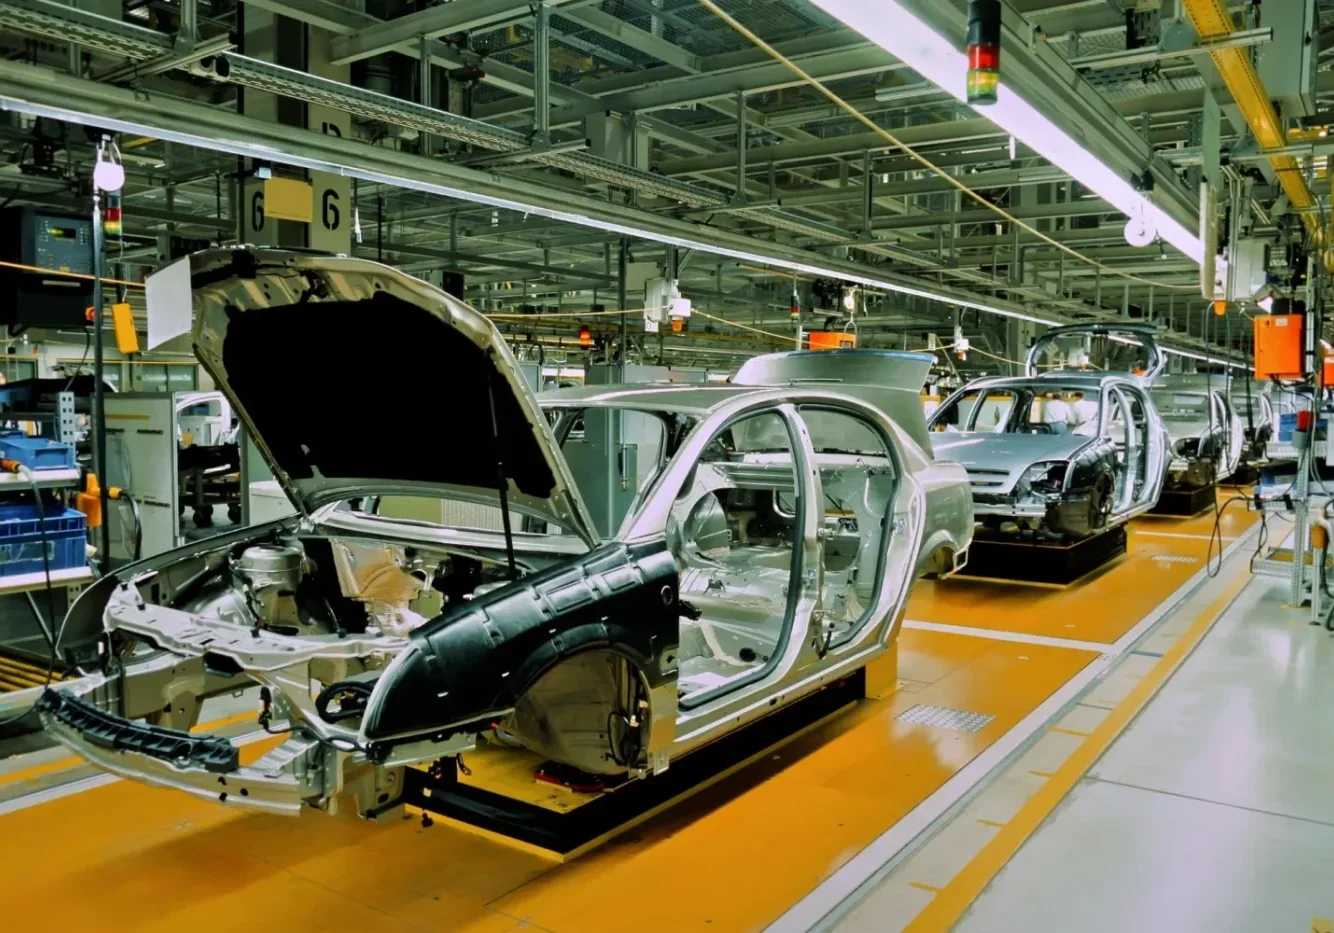 A car assembly line with cars in the process of being built.